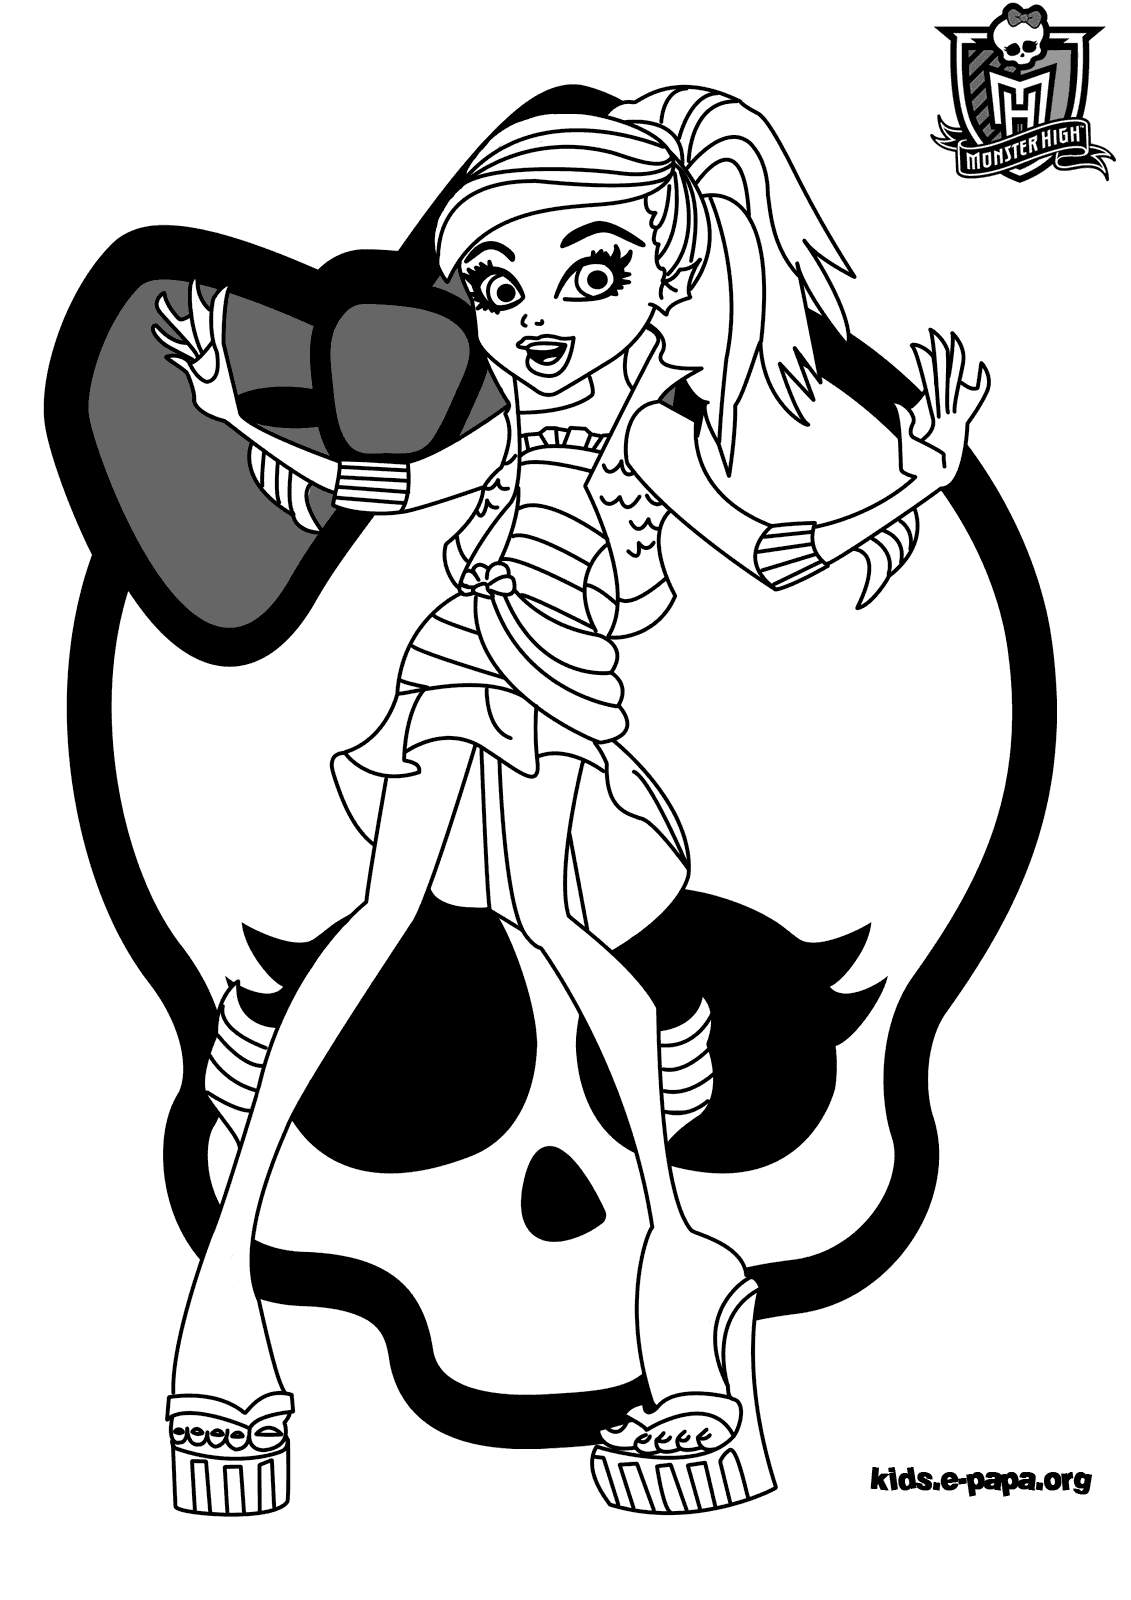 Drawing Monster High #24931 (Animation Movies) – Printable coloring pages